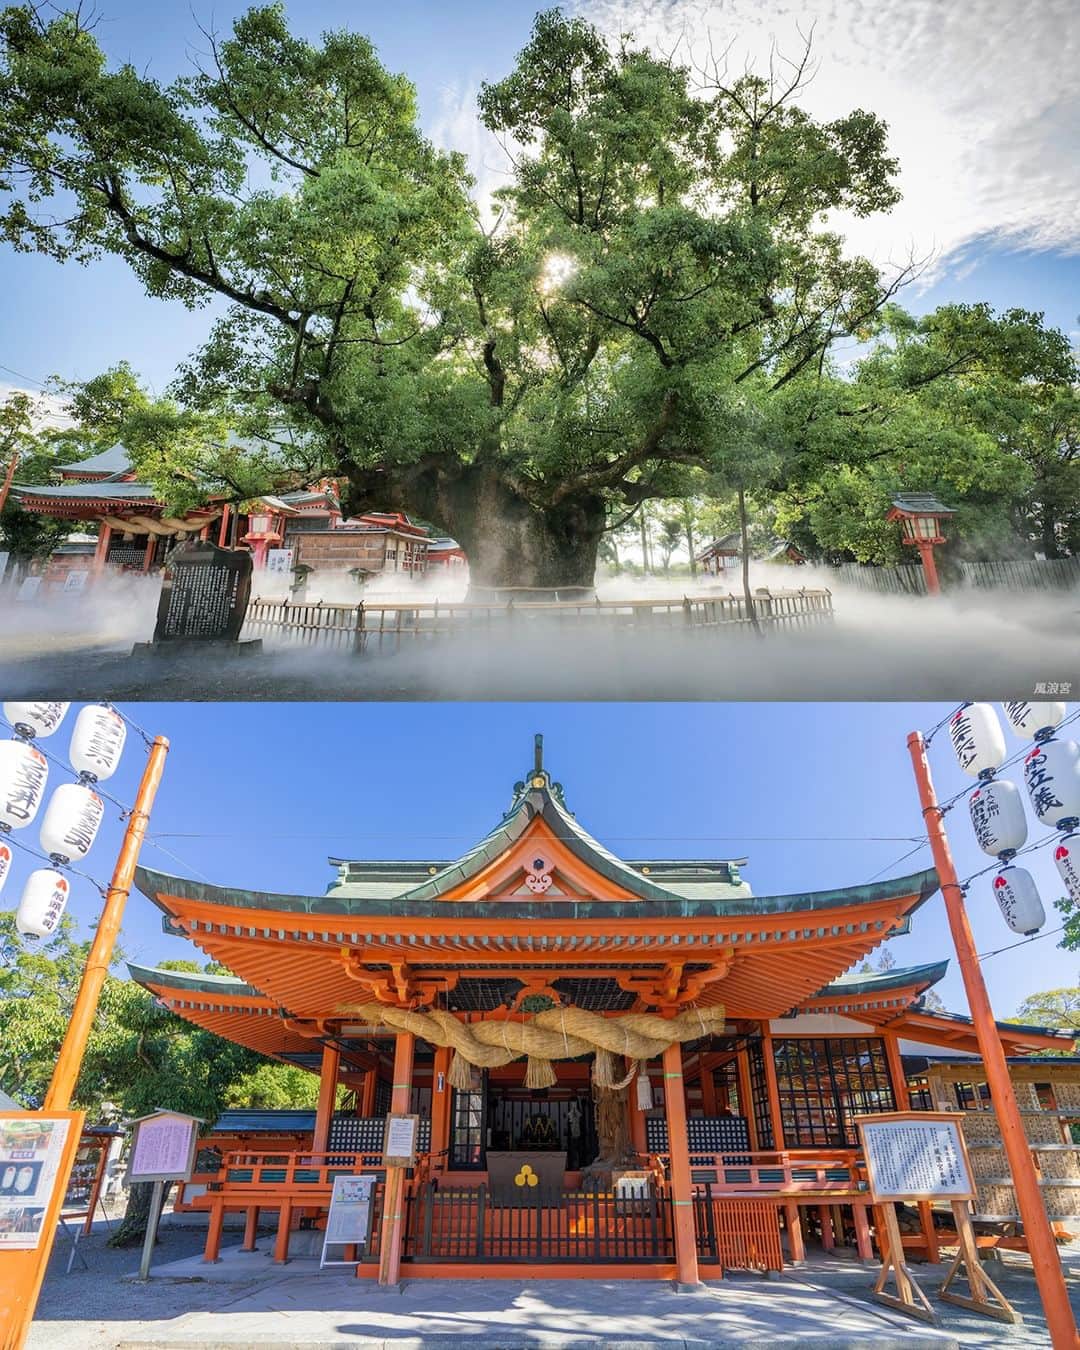 Birthplace of TONKOTSU Ramen "Birthplace of Tonkotsu ramen" Fukuoka, JAPANのインスタグラム：「The 2,000-Year-Old Giant Camphor Tree at Furogu Shrine Is a Sight to Behold!🌲😮 Located in Okawa, Furogu Shrine has a history of around 1,800 years. It is said to have been established after Empress Jingu, the 14th Japanese imperial ruler, met a white heron on her way back from a foreign campaign. The heron was believed to be the incarnation of a deity, and a shrine was built near the camphor tree where it had perched.⛩️  On the grounds of Furogu Shrine is an approximately 2,000-year-old giant camphor tree where the white heron was said to have perched. The tree has an impressive presence, with its huge trunk boasting a circumference of over 8 meters, while its branches stretch out 20-30 meters in all directions!✨  Pray for good luck while feeling the giant camphor tree’s spiritual power!👏  ------------------------- FOLLOW @goodvibes_fukuoka for more ! -------------------------  #fukuoka #fukuokajapan #kyushu #kyushutrip #explorejapan #instajapan #visitjapan #japantrip #japantravel #japangram #japanexperience #beautifuljapan #japanlovers #visitjapanjp #japaneseshrine」